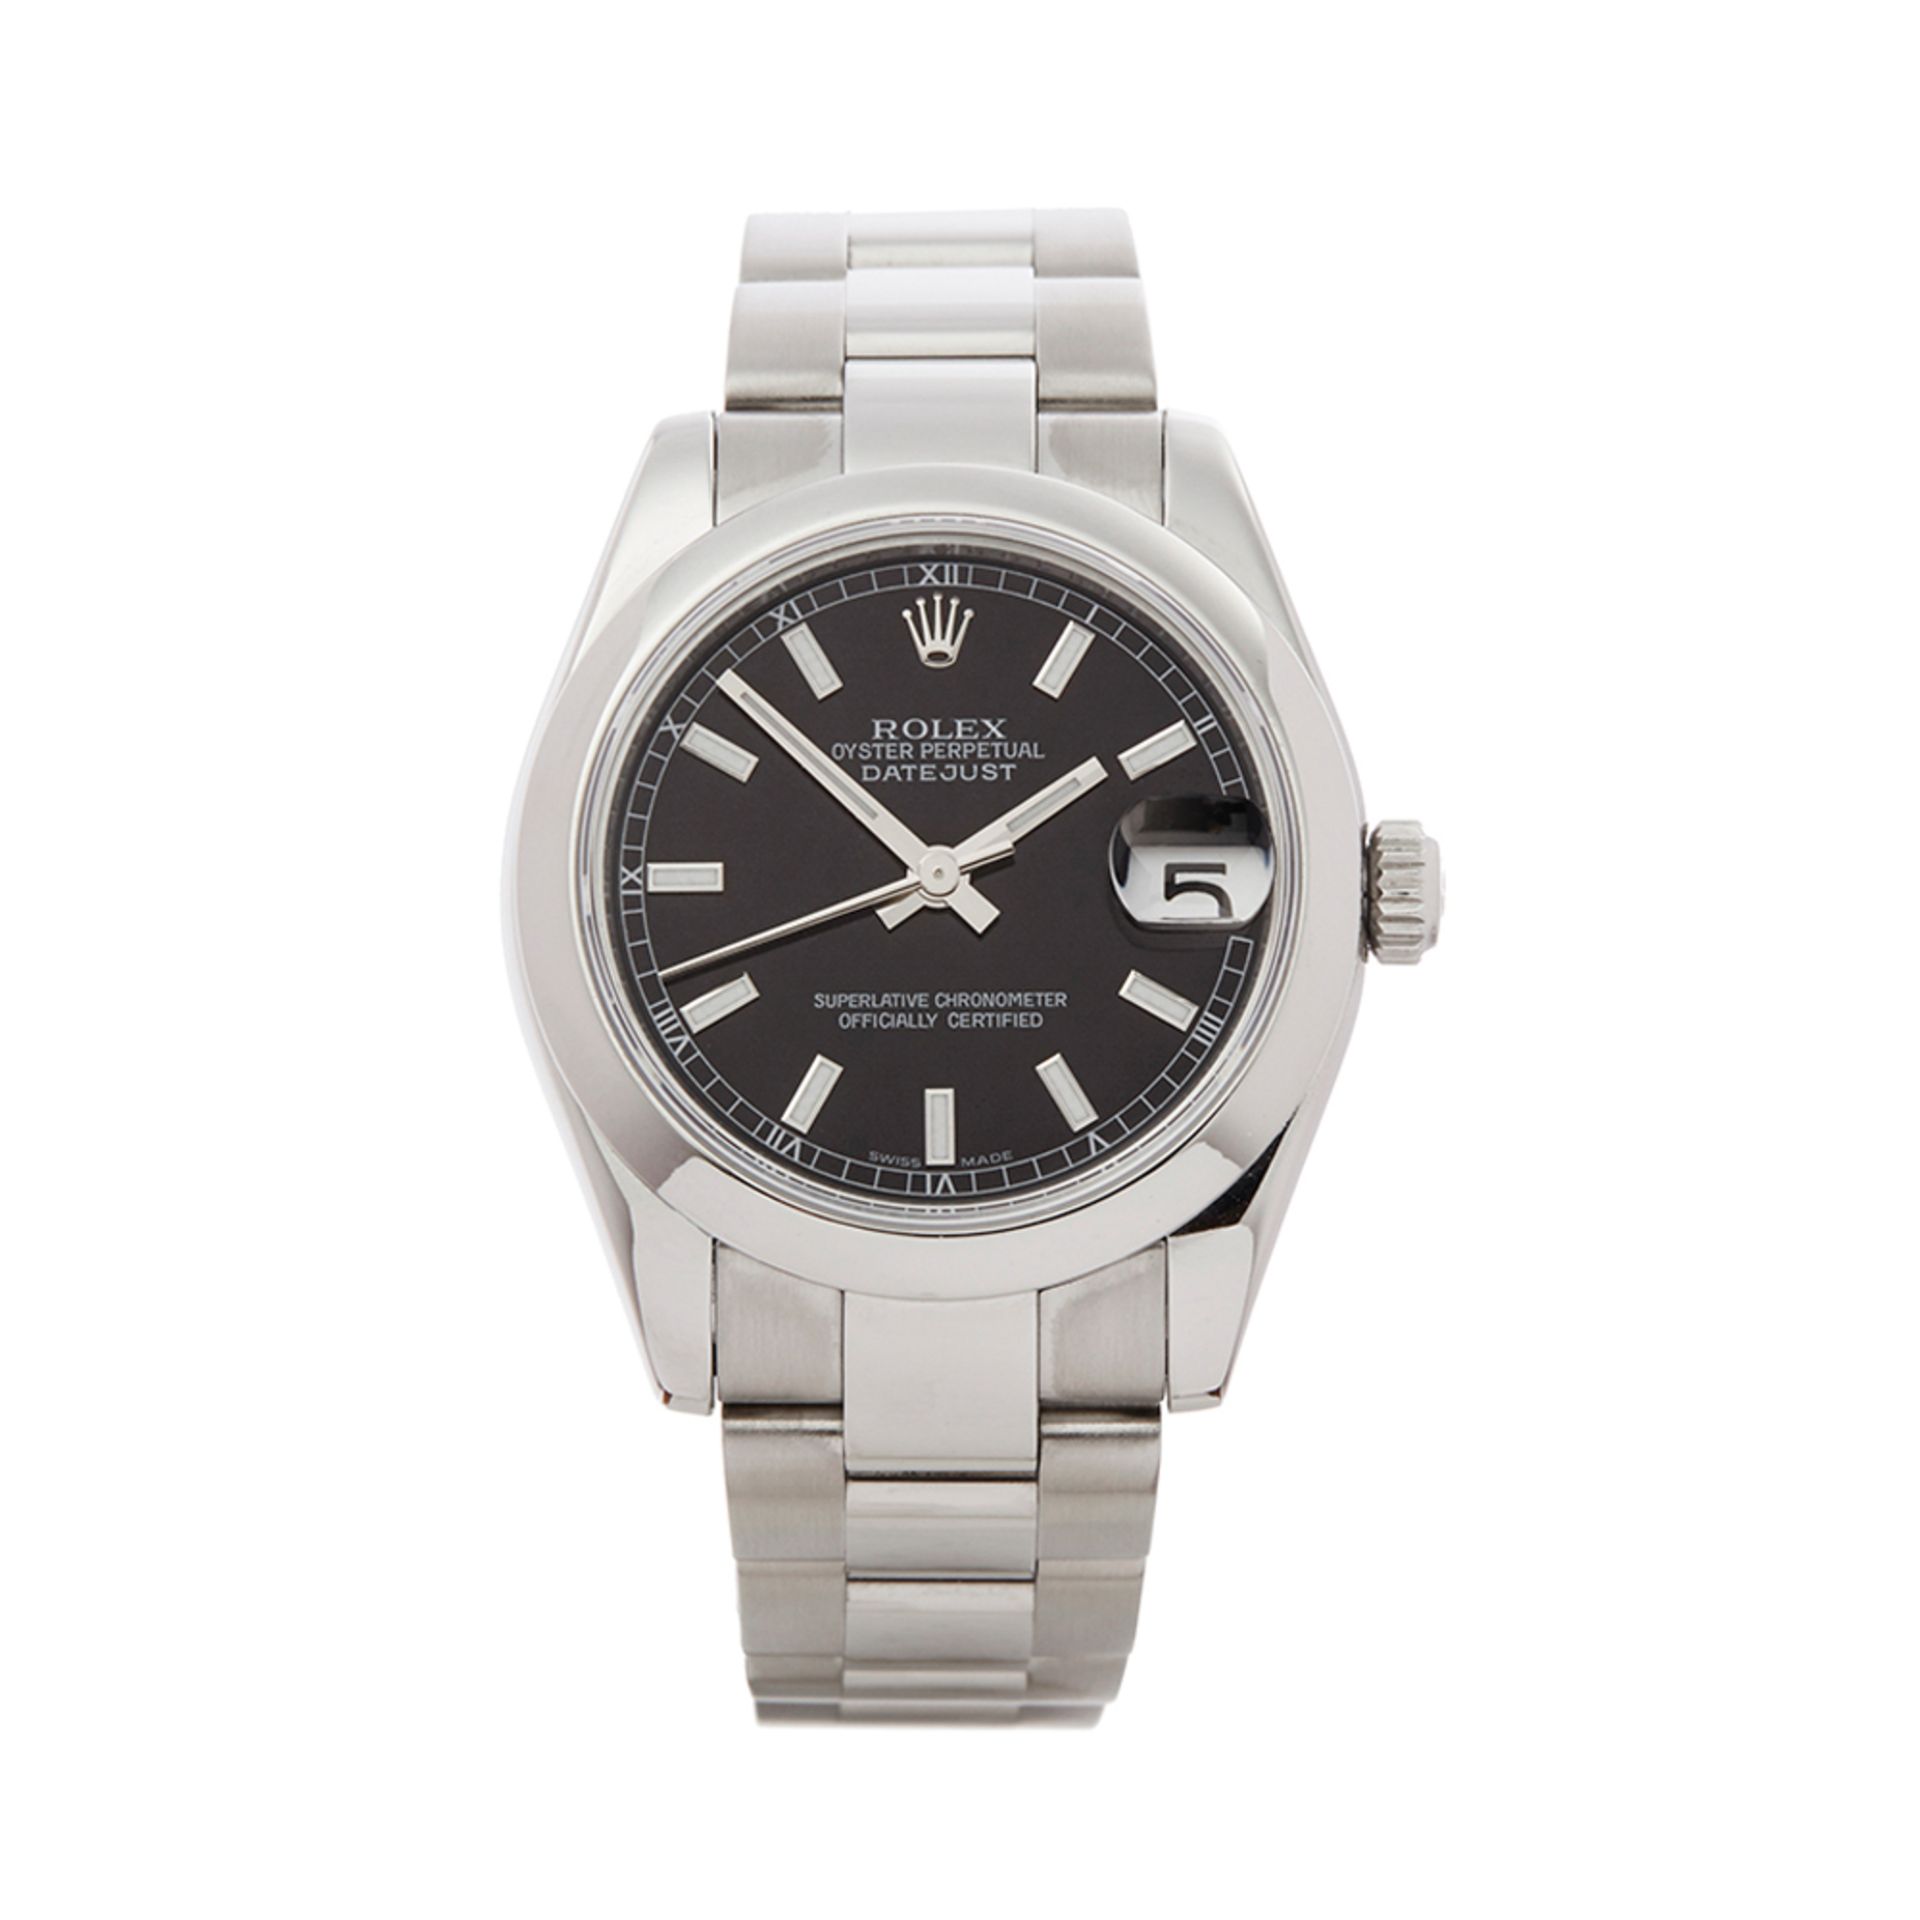 Rolex Datejust 31mm Stainless Steel - 178240 - Image 2 of 7